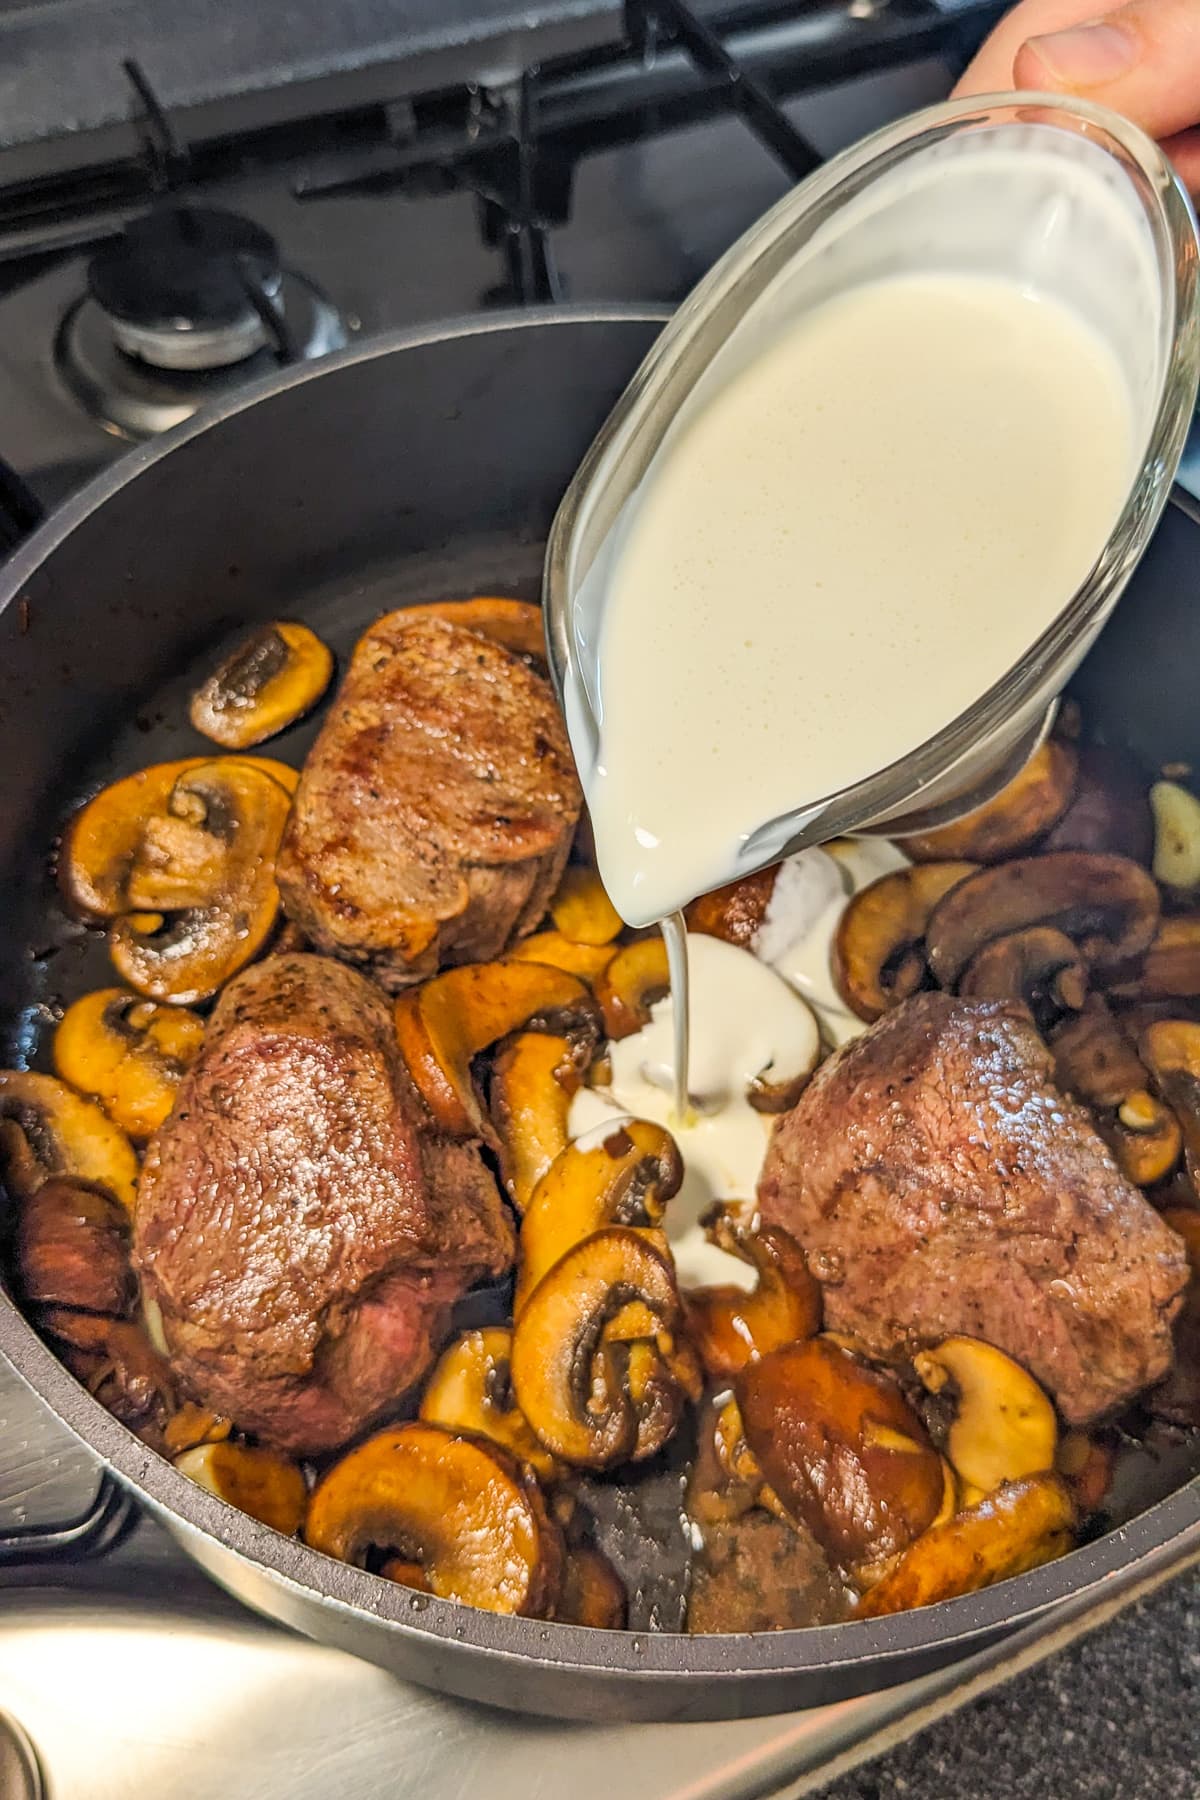 Pouring heavy cream over fried mushrooms and beef.